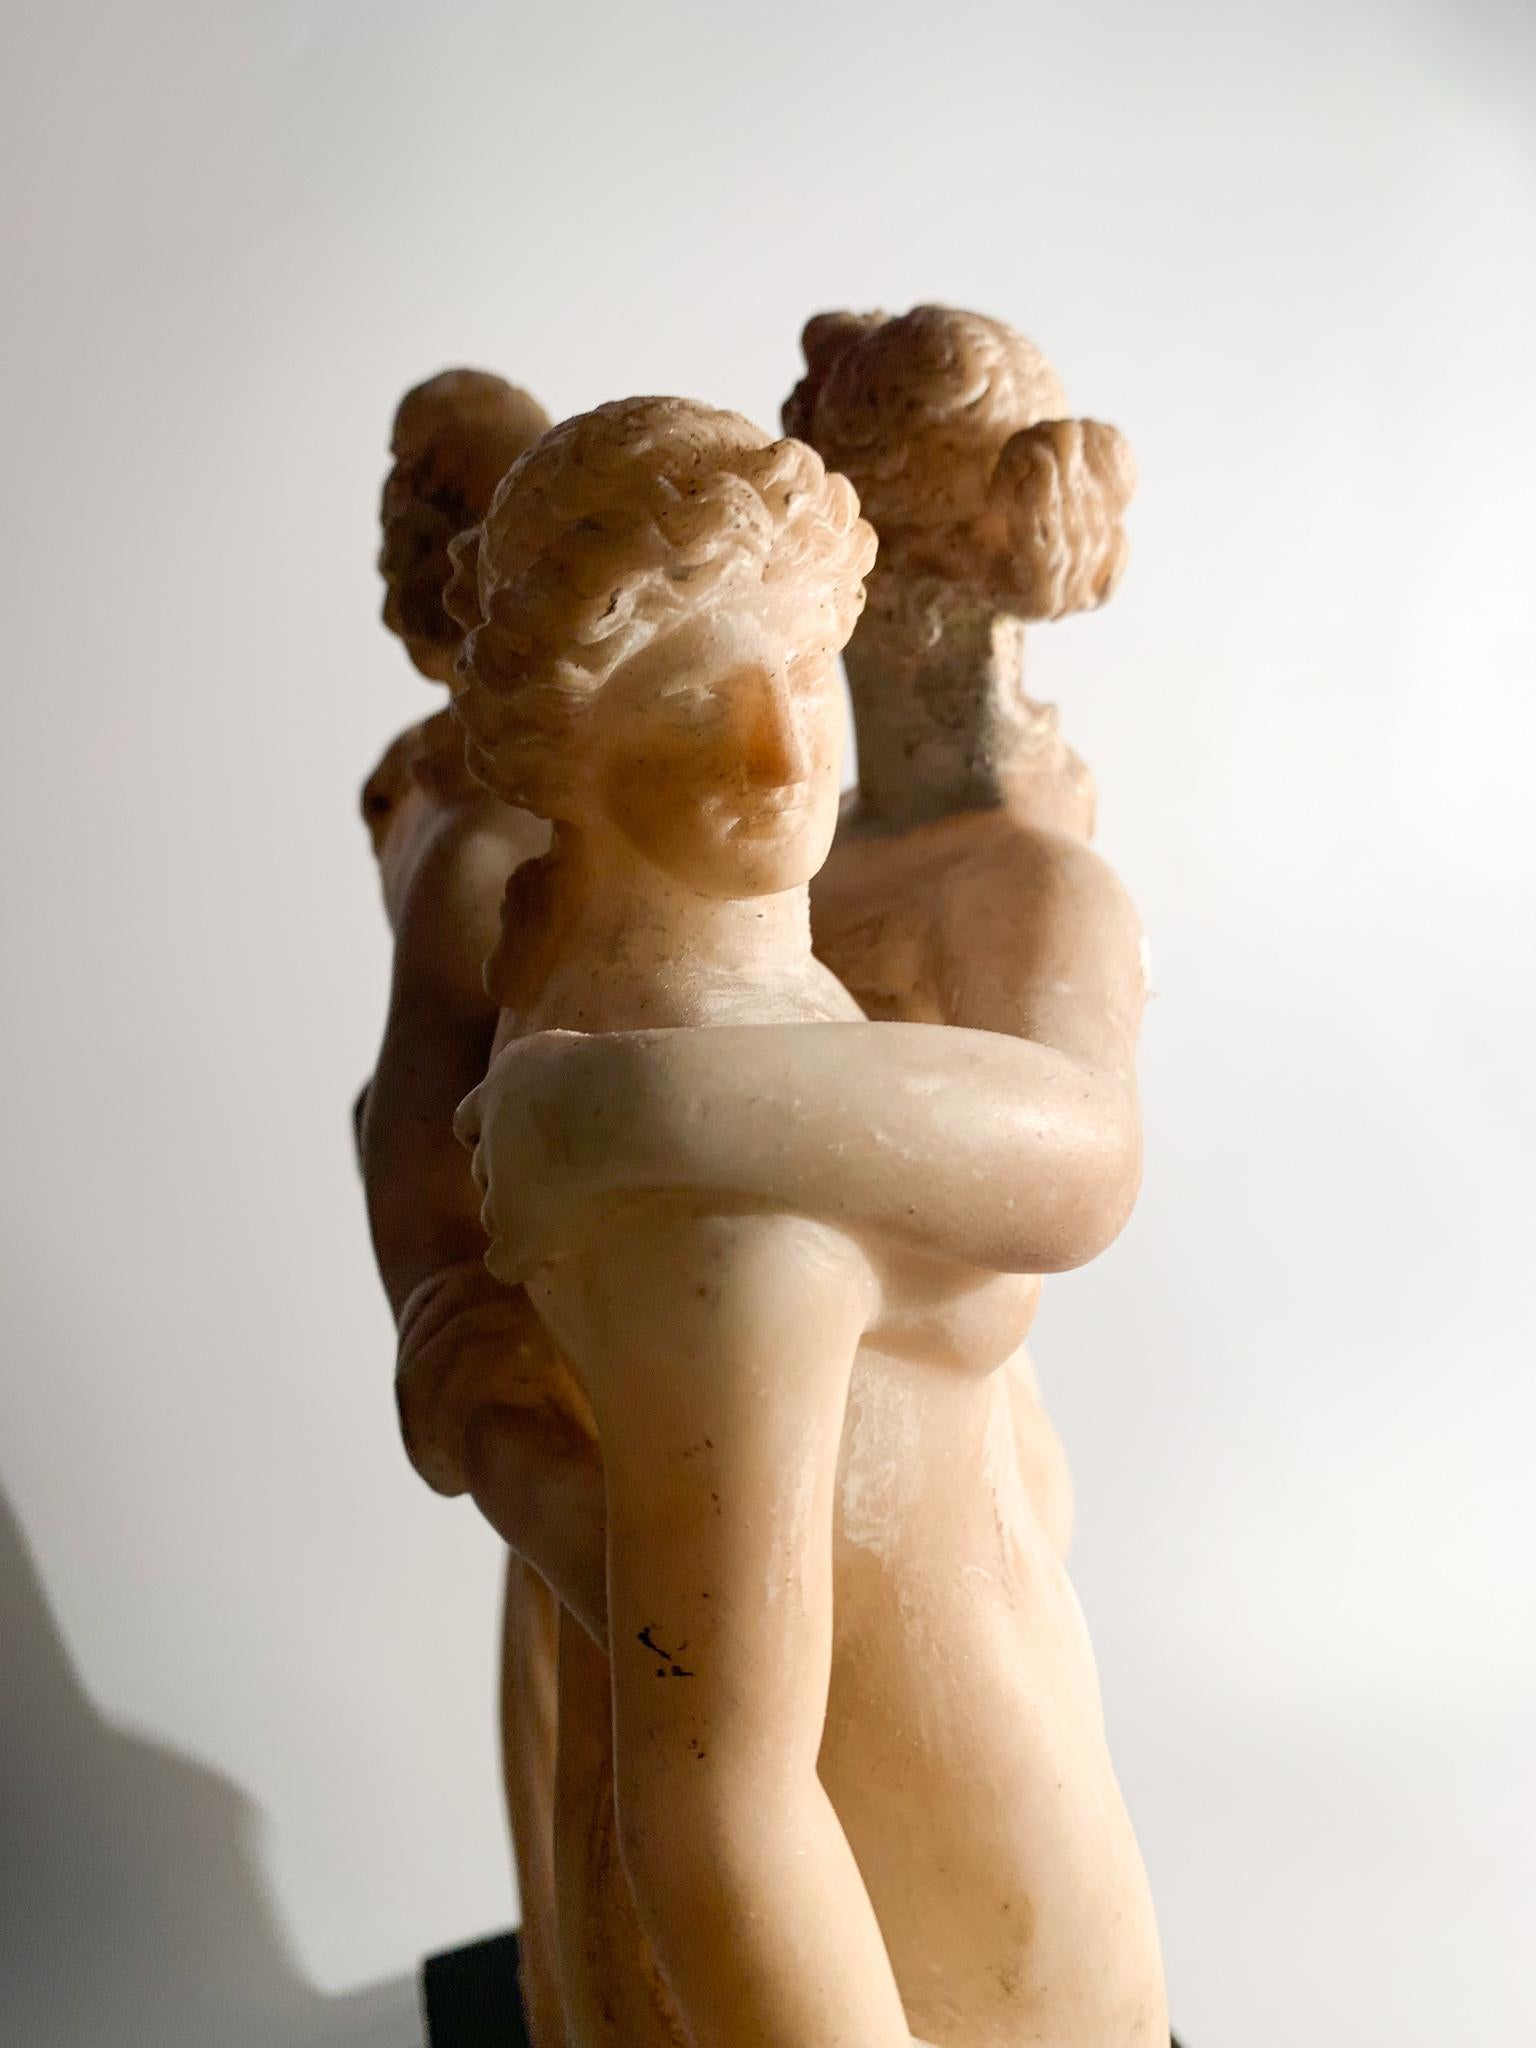 Mid-20th Century Italian Marble Sculpture of the Three Graces from the 1940s